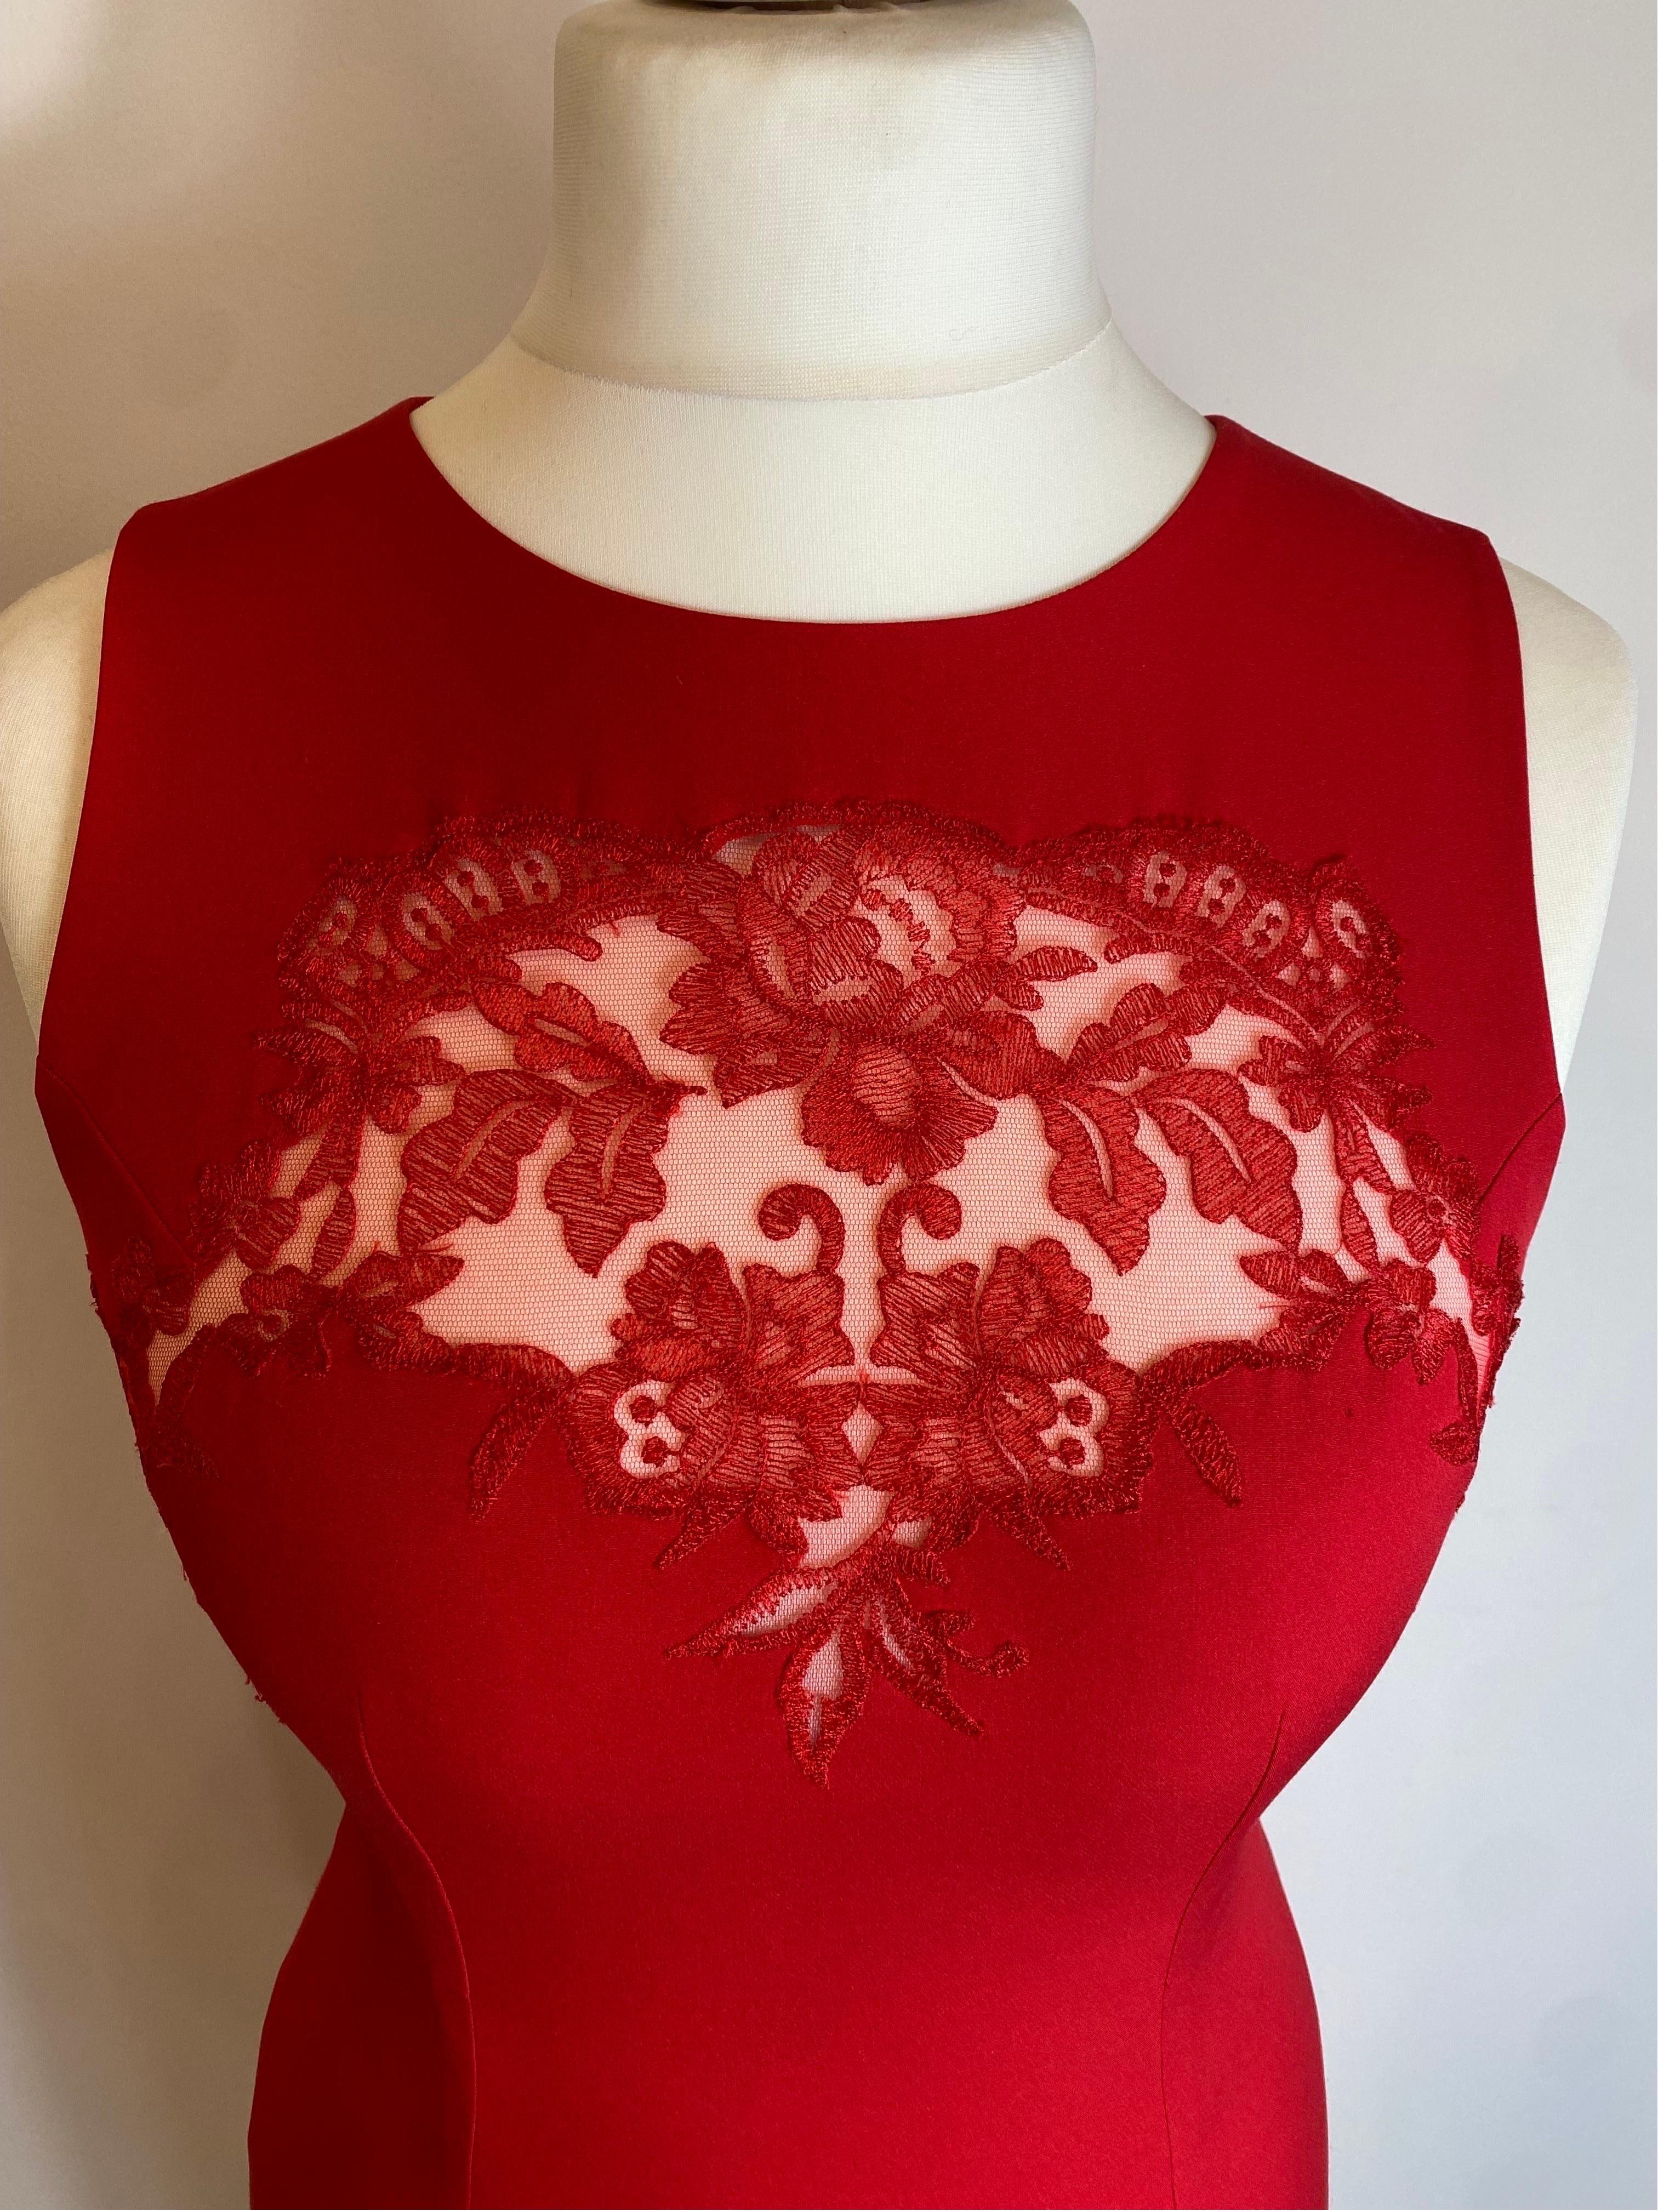 Ermanno Scervino red sheath Dress In Good Condition For Sale In Carnate, IT